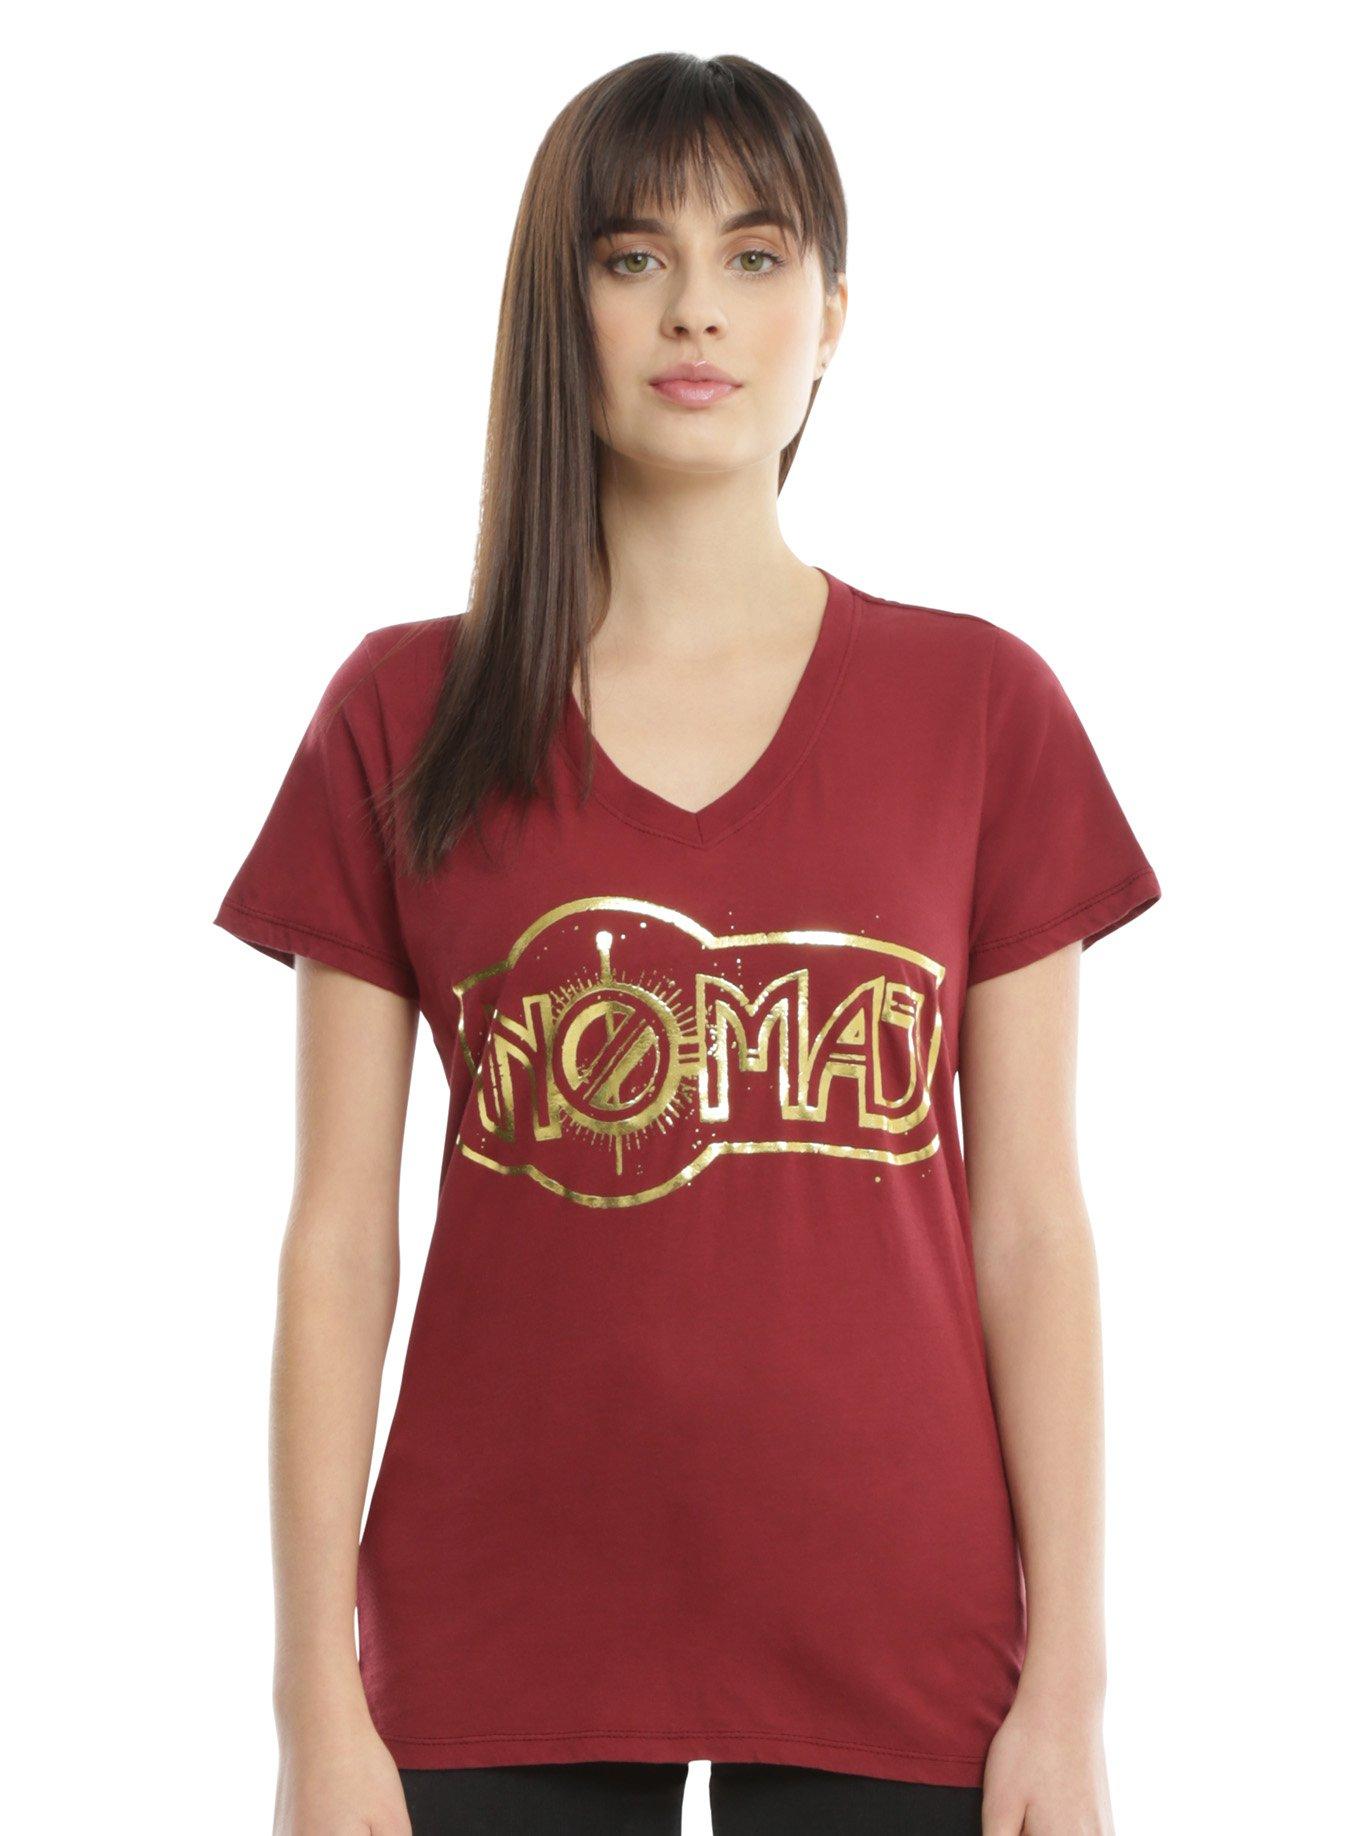 Fantastic Beasts And Where To Find Them No-Maj Girls T-Shirt, BURGUNDY, hi-res